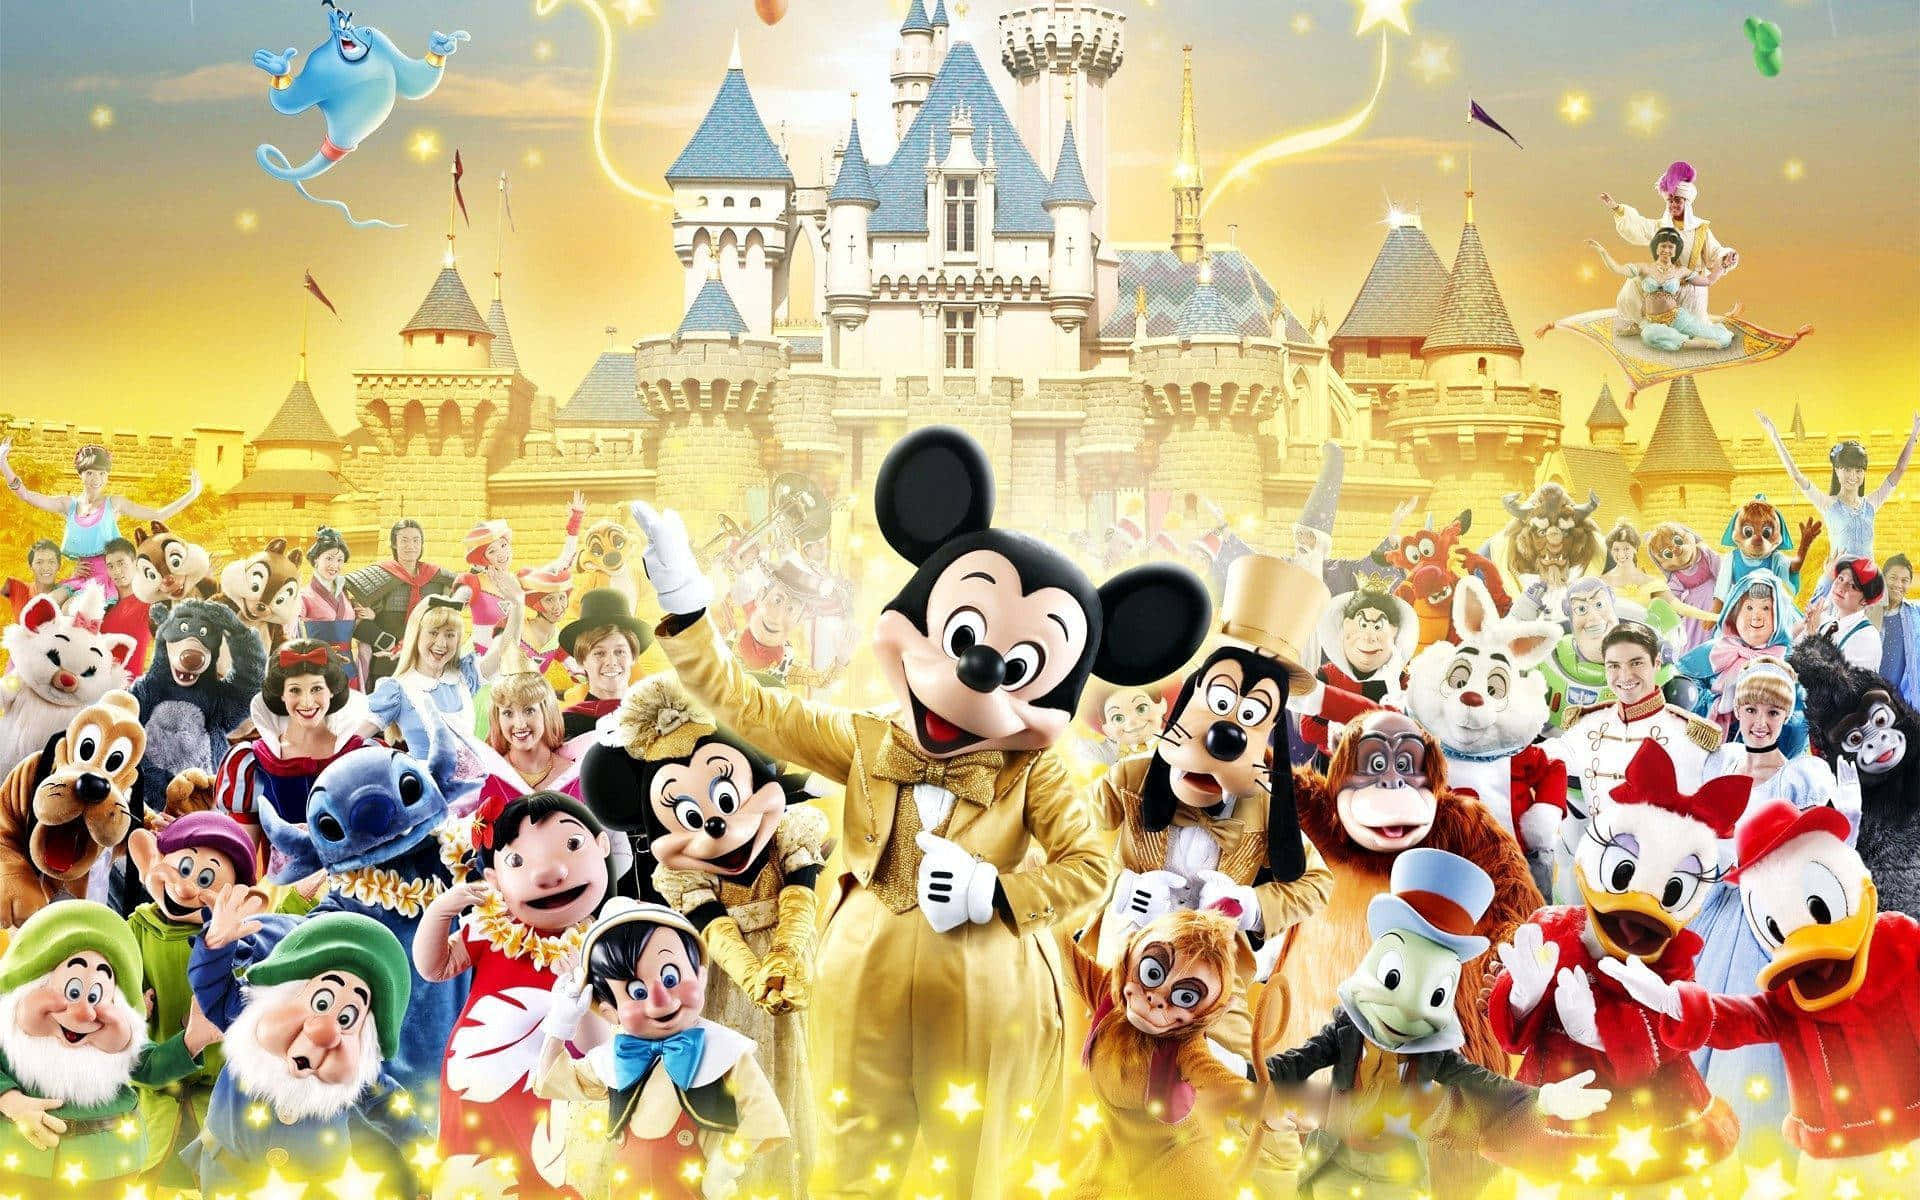 Mickey Mouse and Minnie Mouse smile brightly at the audience on the Disney Mac Wallpaper